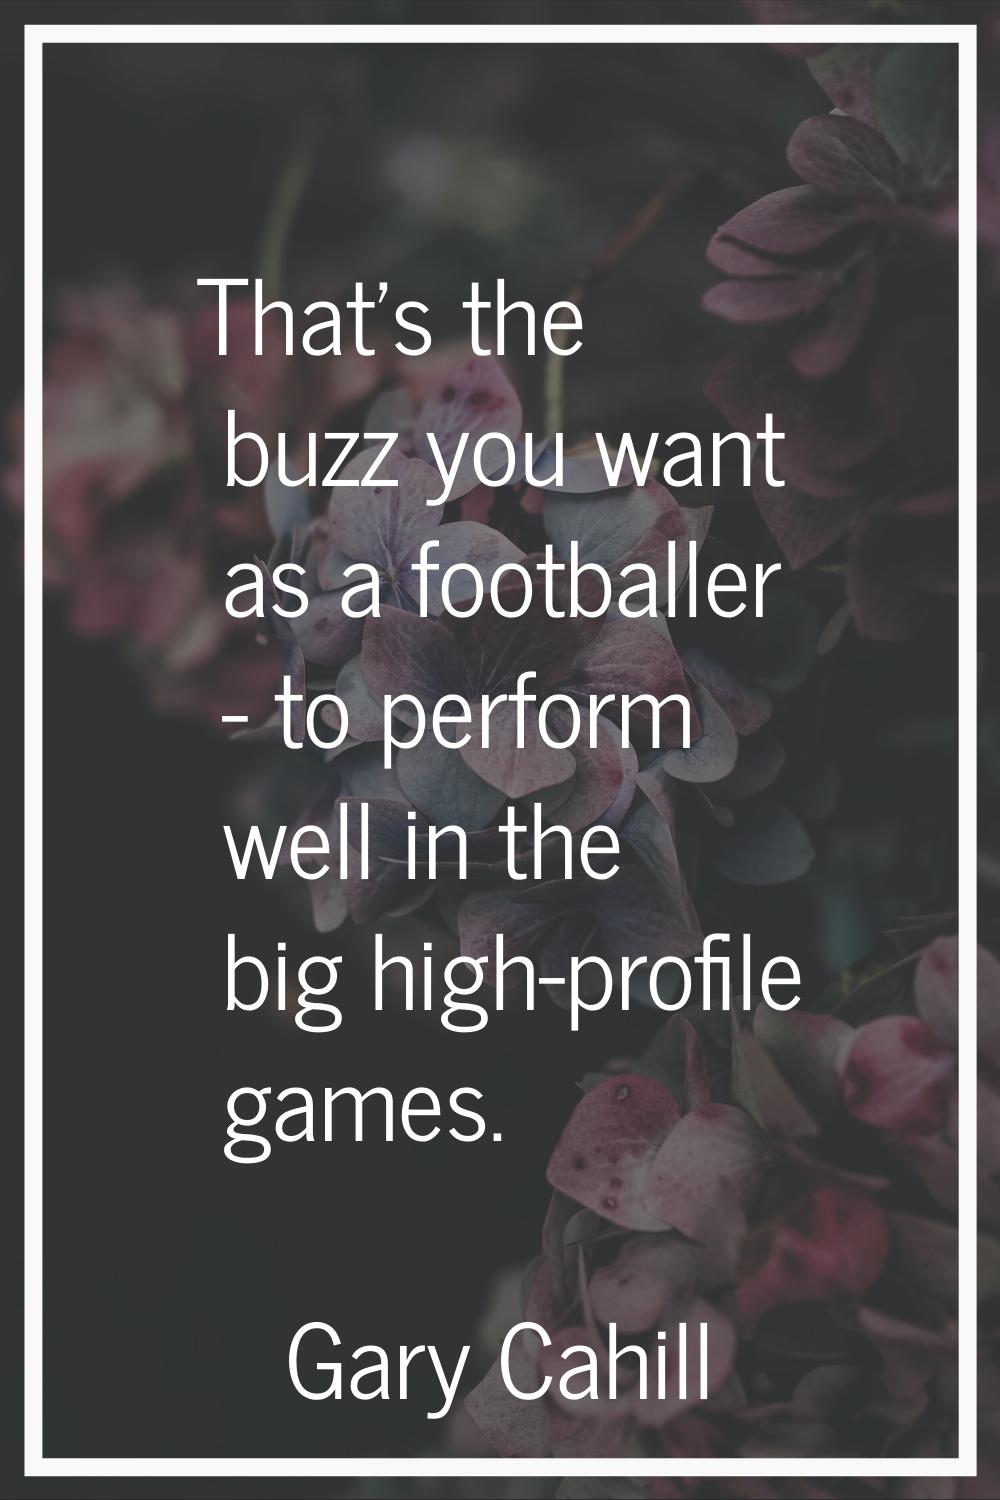 That's the buzz you want as a footballer - to perform well in the big high-profile games.